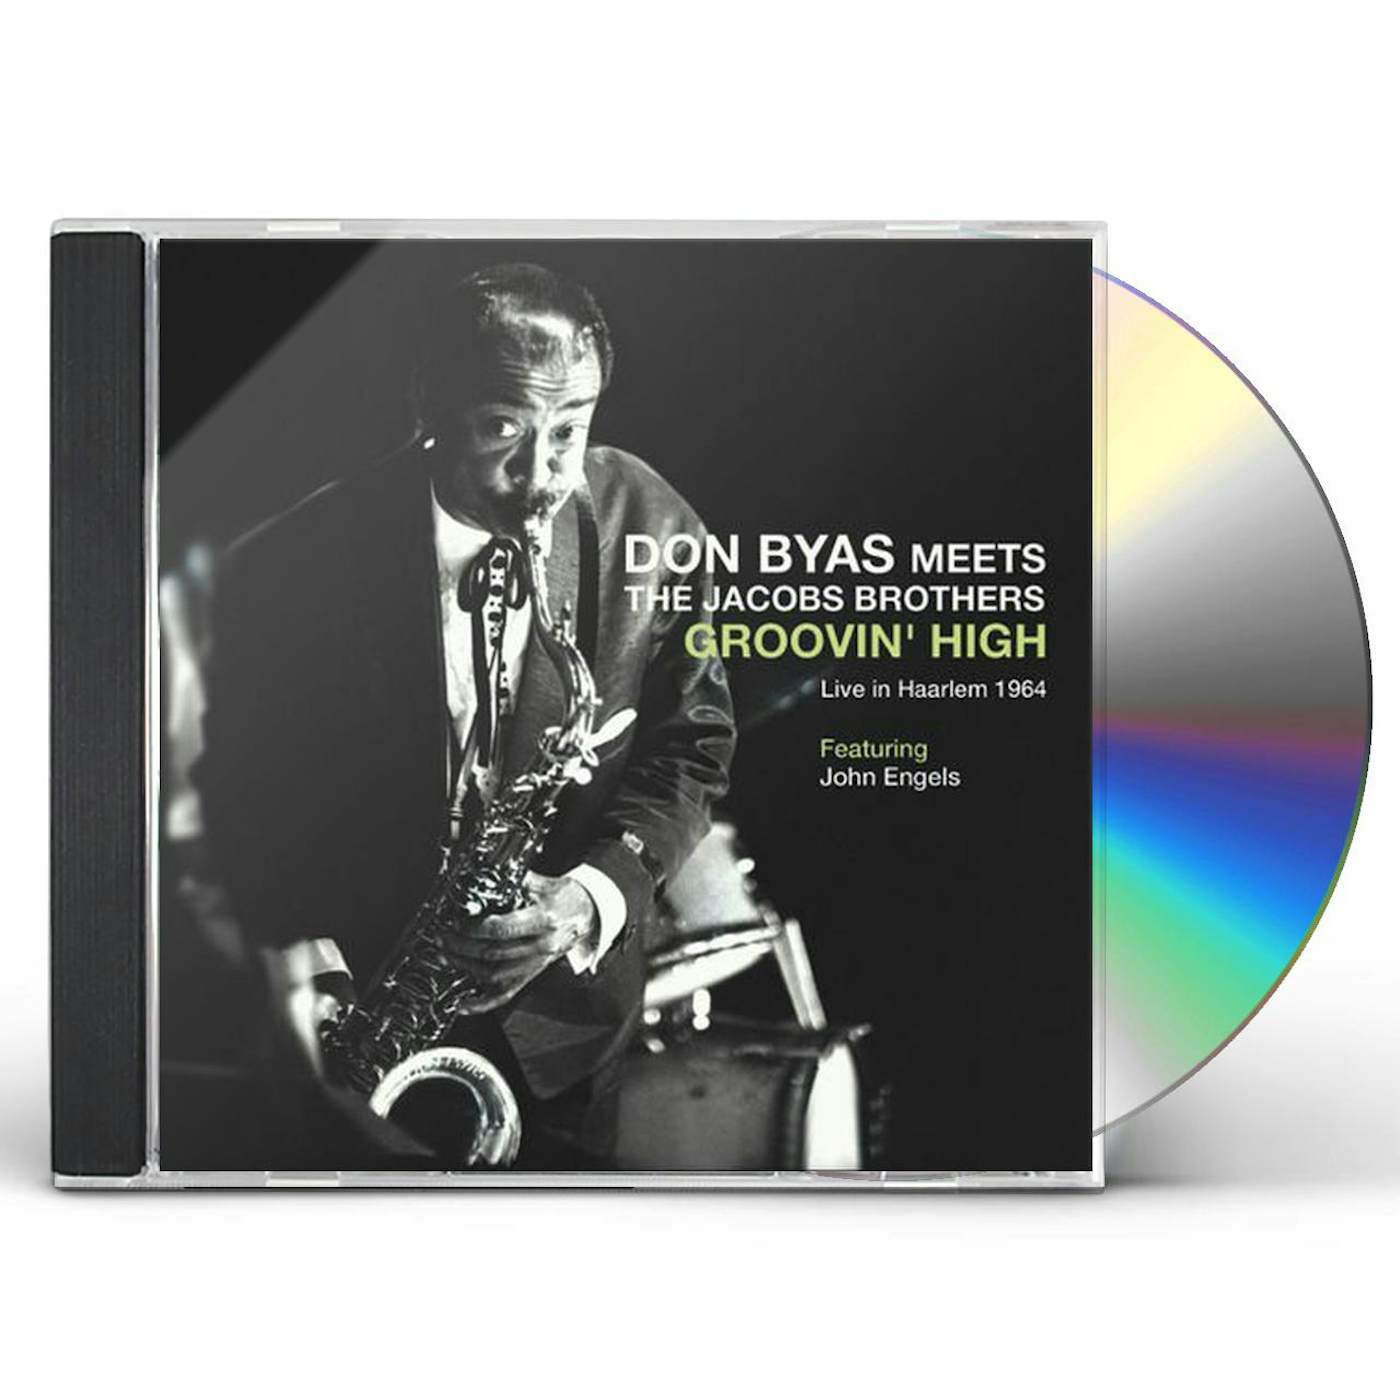 Don Byas MEETS THE JACOB BROTHERS: GROOVIN HIGH CD